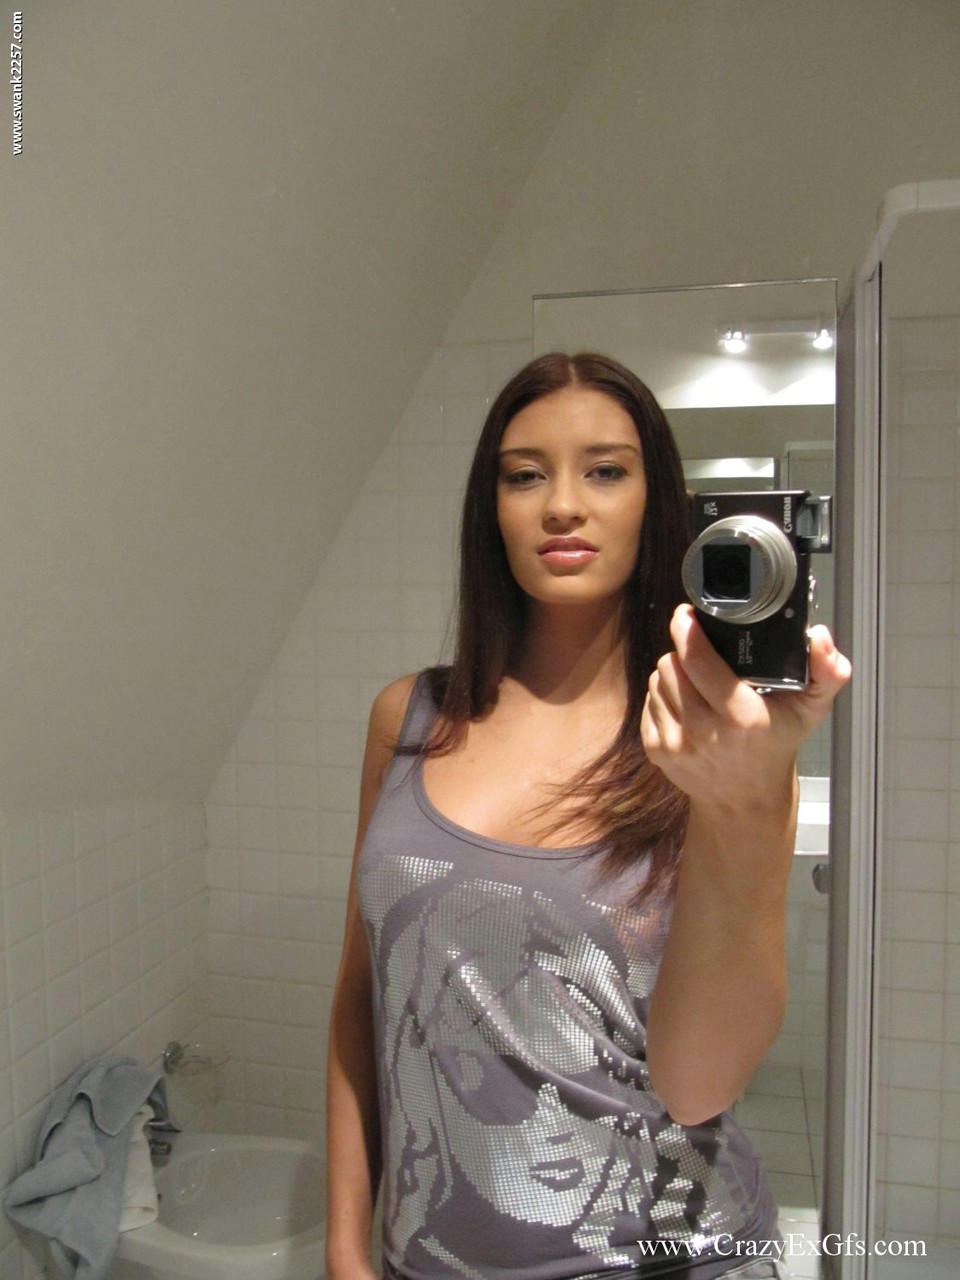 Amateur chick takes mirror selfies while stripping naked in bathroom picture